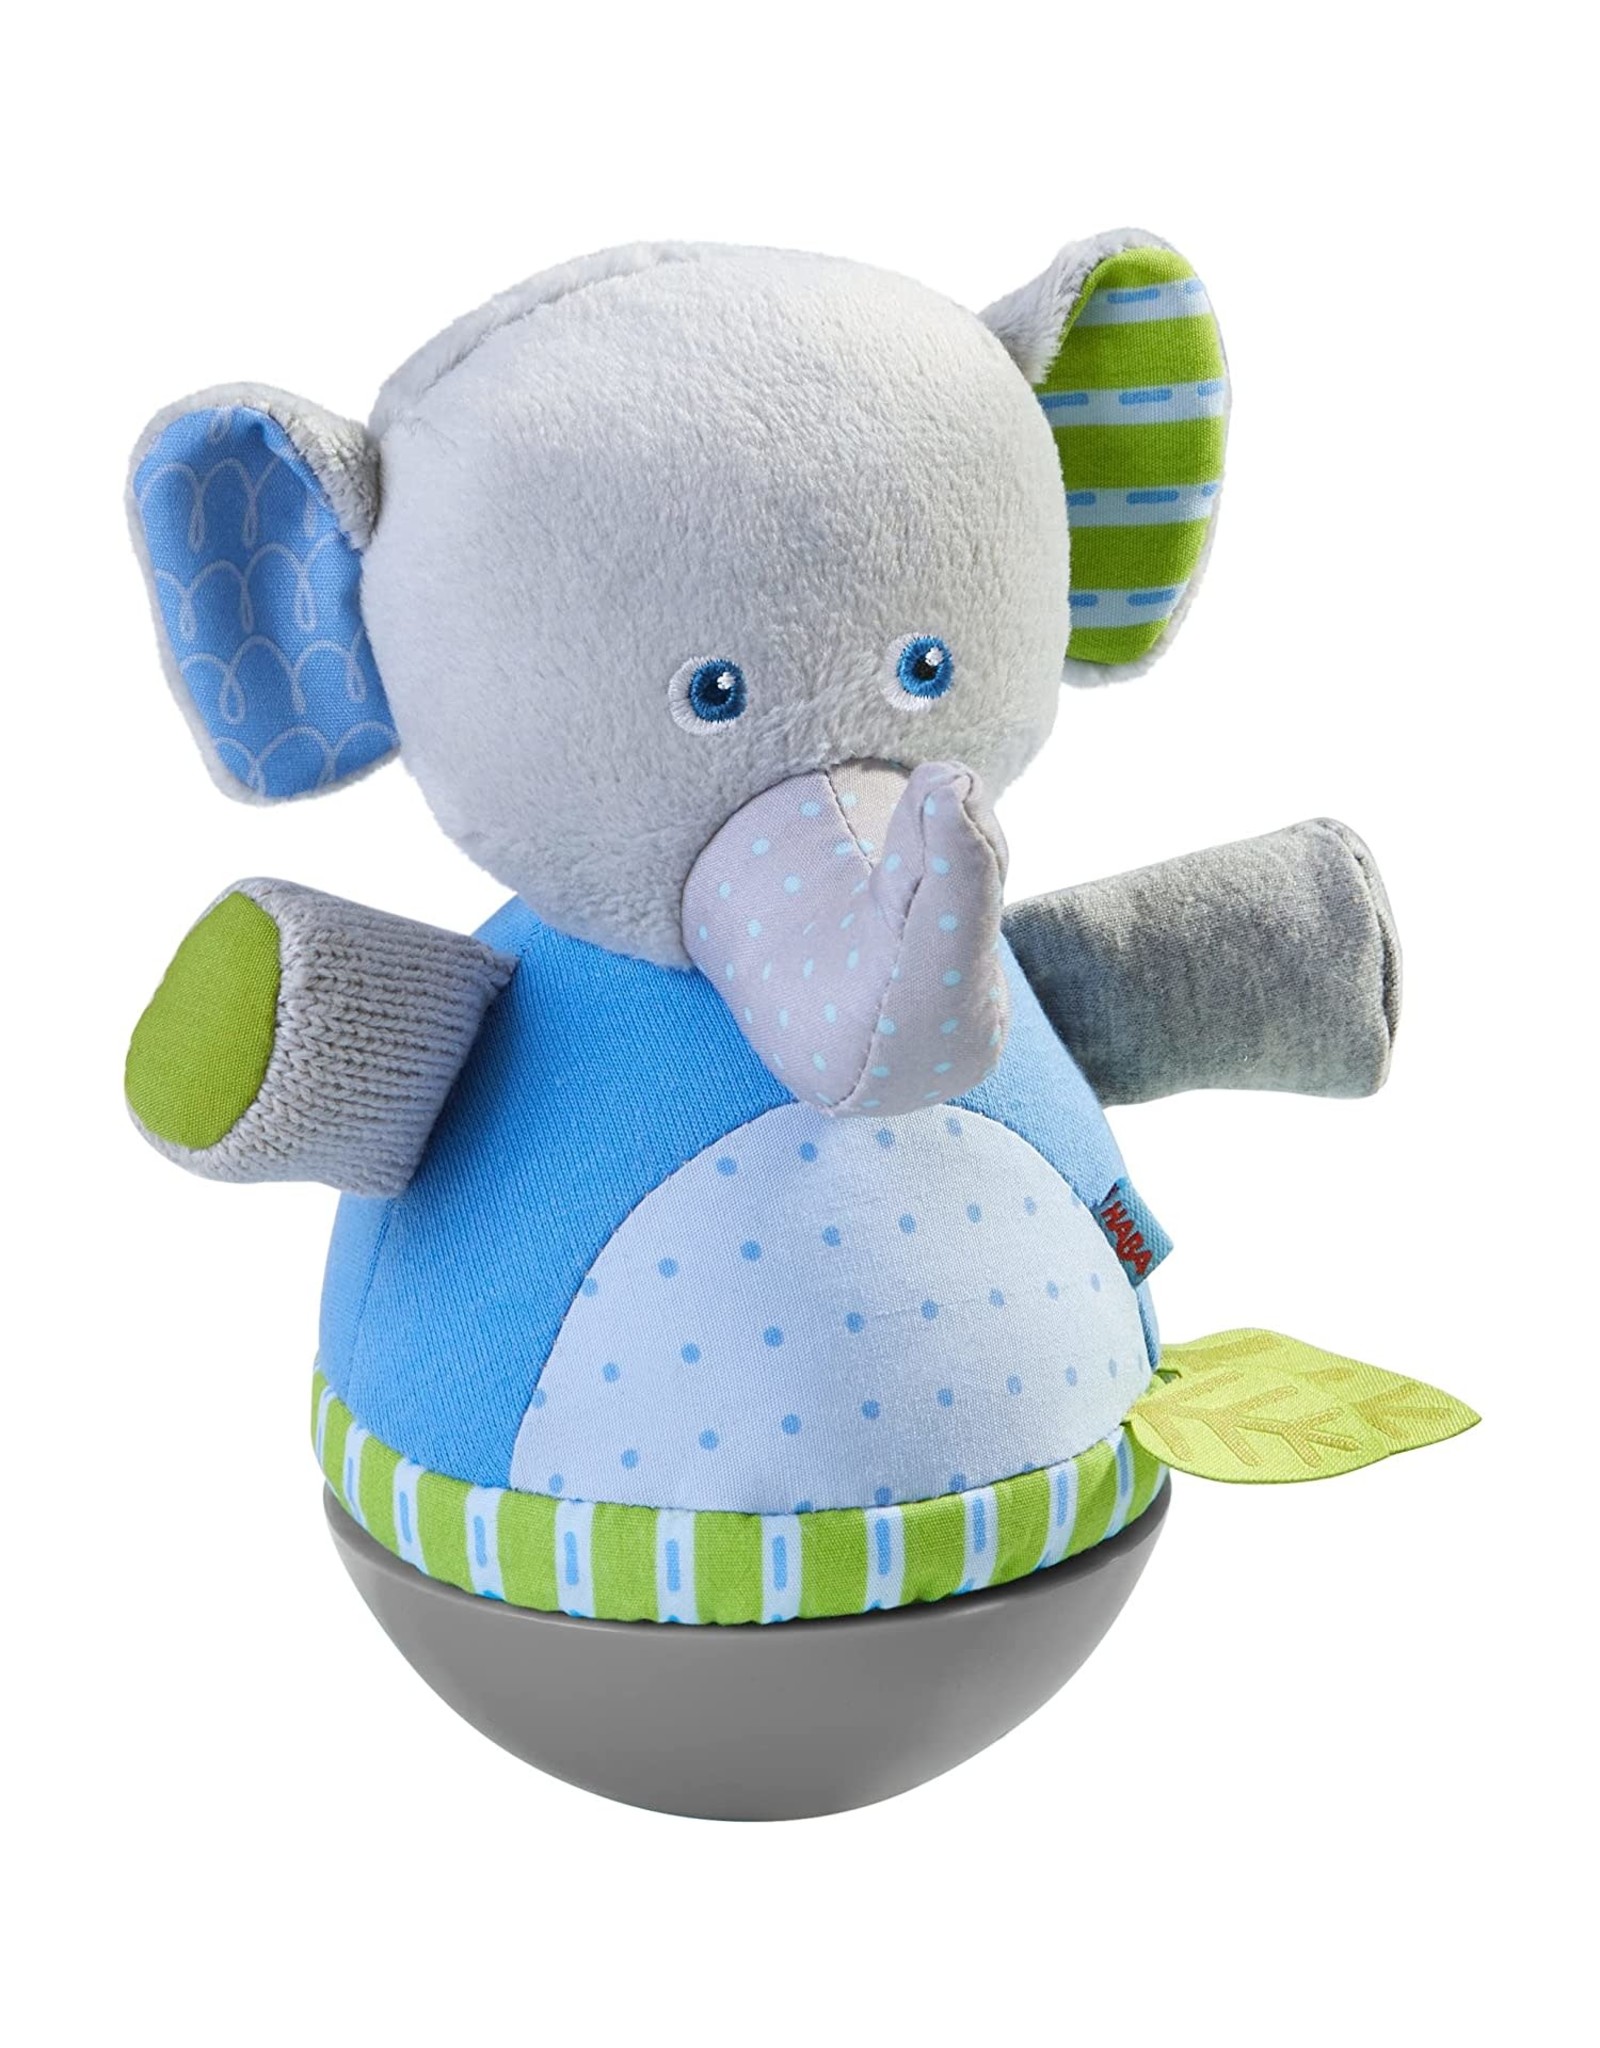 Roly Poly Toy Elephant